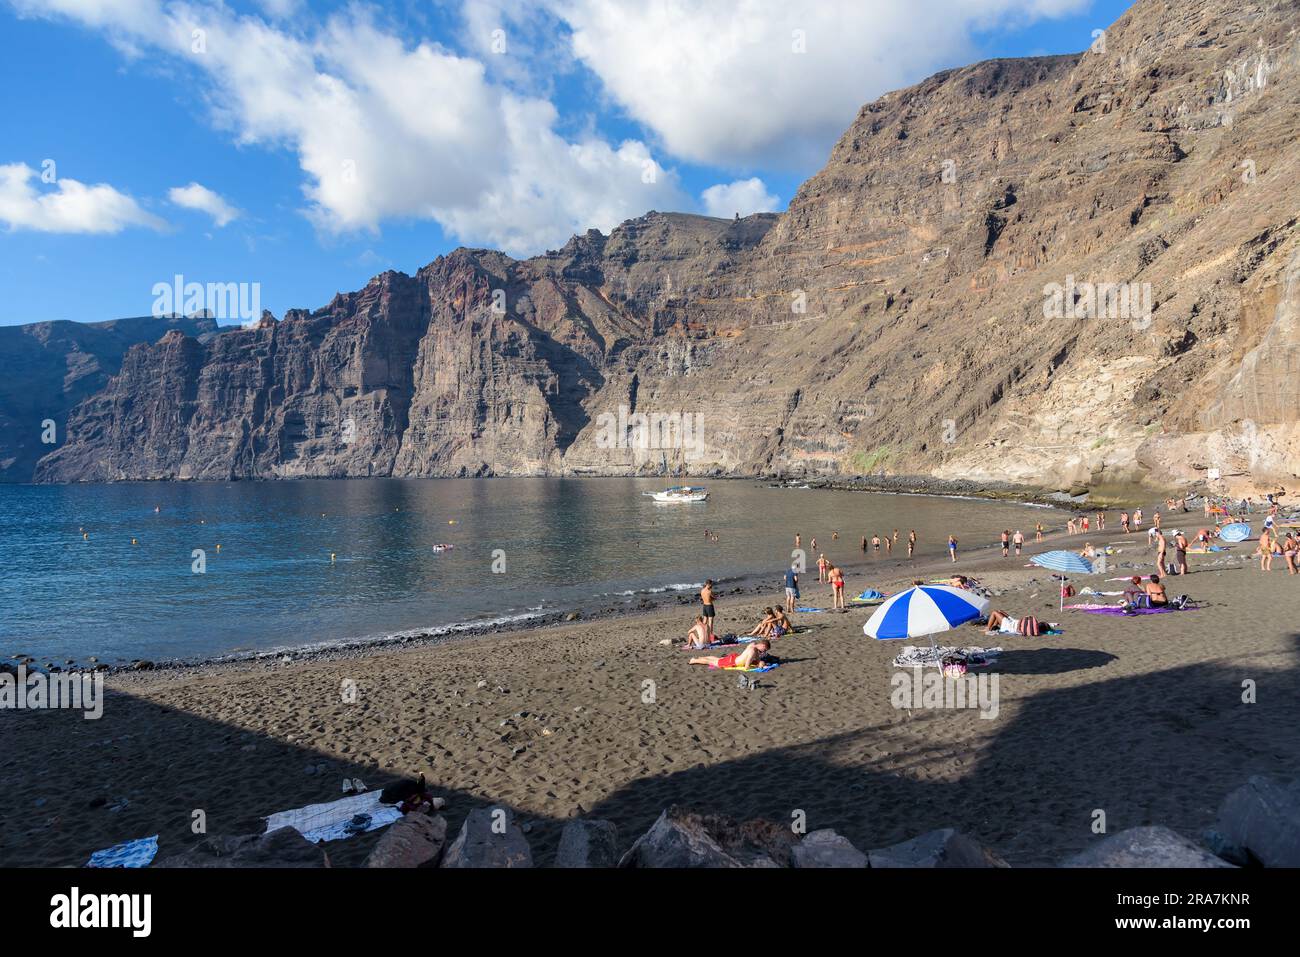 Los Gigantes, Tenerife, Canary Islands, Spain - September 21, 2022: People relax on picturesque Los Guios beach amongst the majestic cliffs Stock Photo